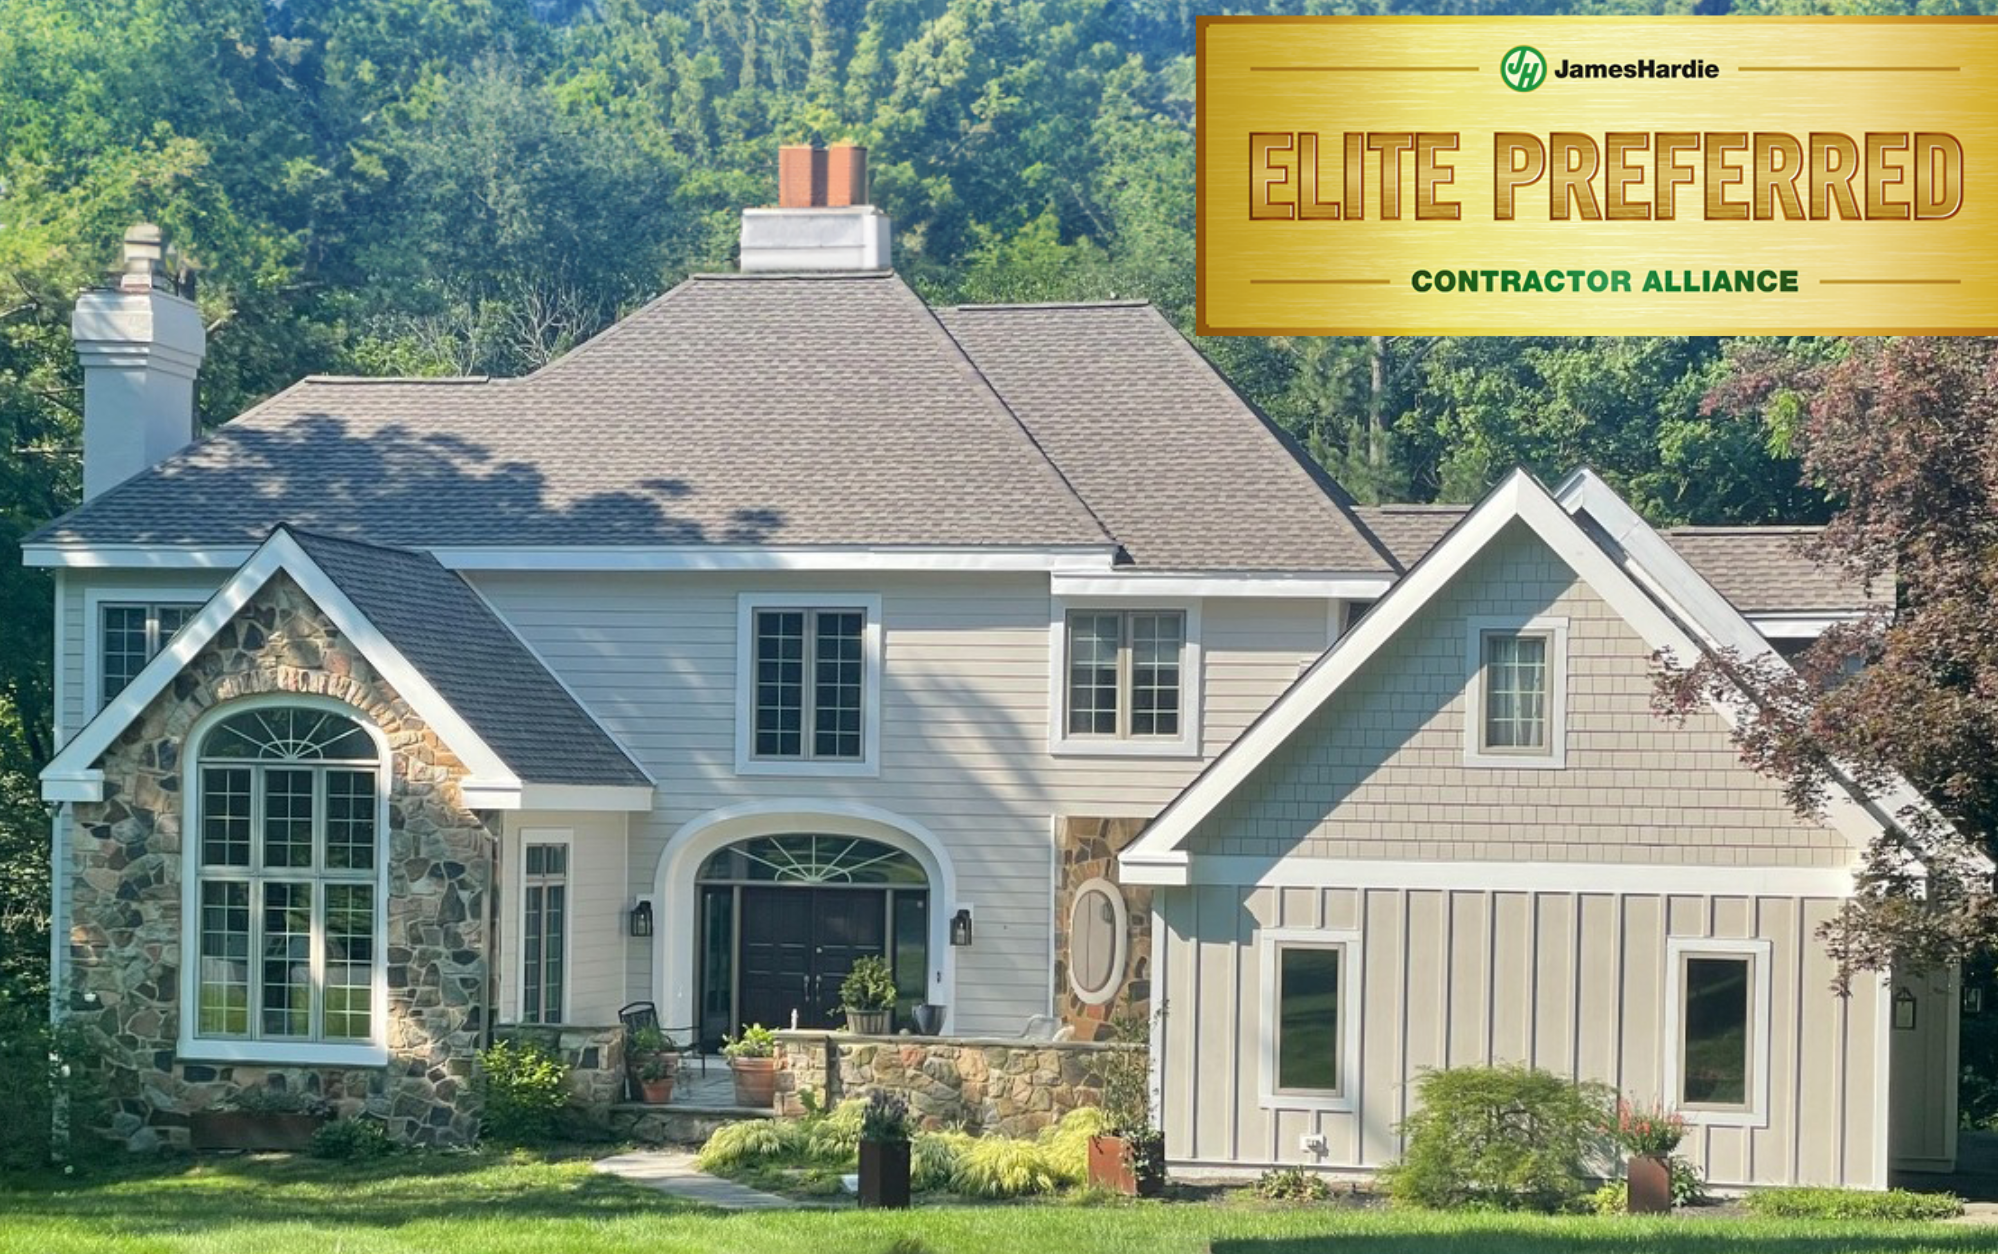 G. Fedale James Hardie Elite Preferred Contract and Siding Installation